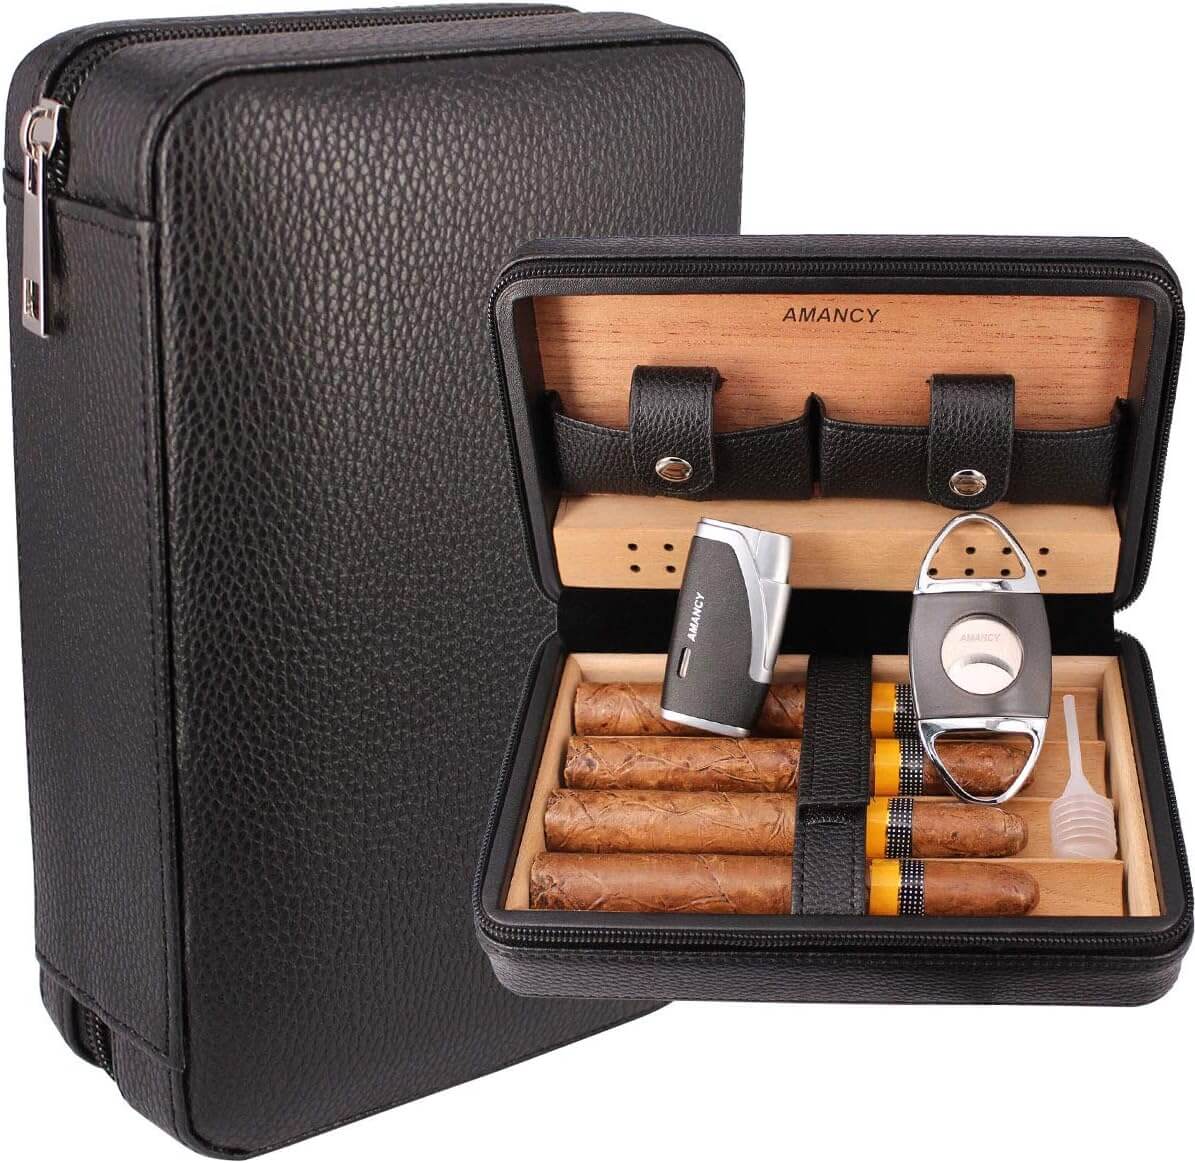 AMANCY Classic Leather 4 Cigar Travel Case Humidor